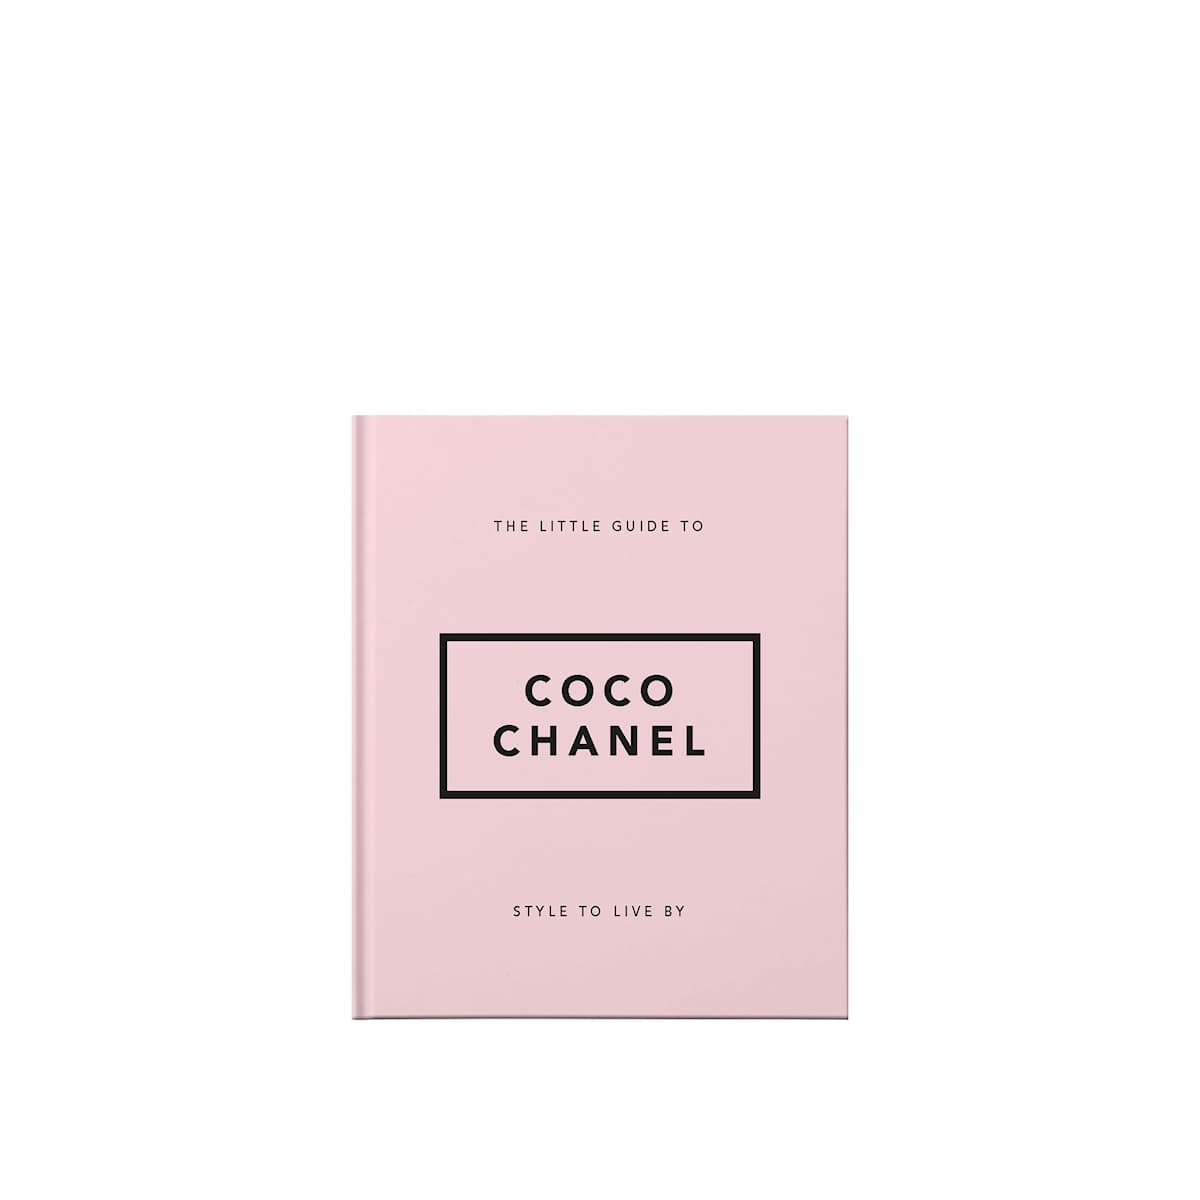 Stream Télécharger le PDF The Little Guide to Coco Chanel: Style to Live By  en version PDF gYVIY from Lipafeka.bara9